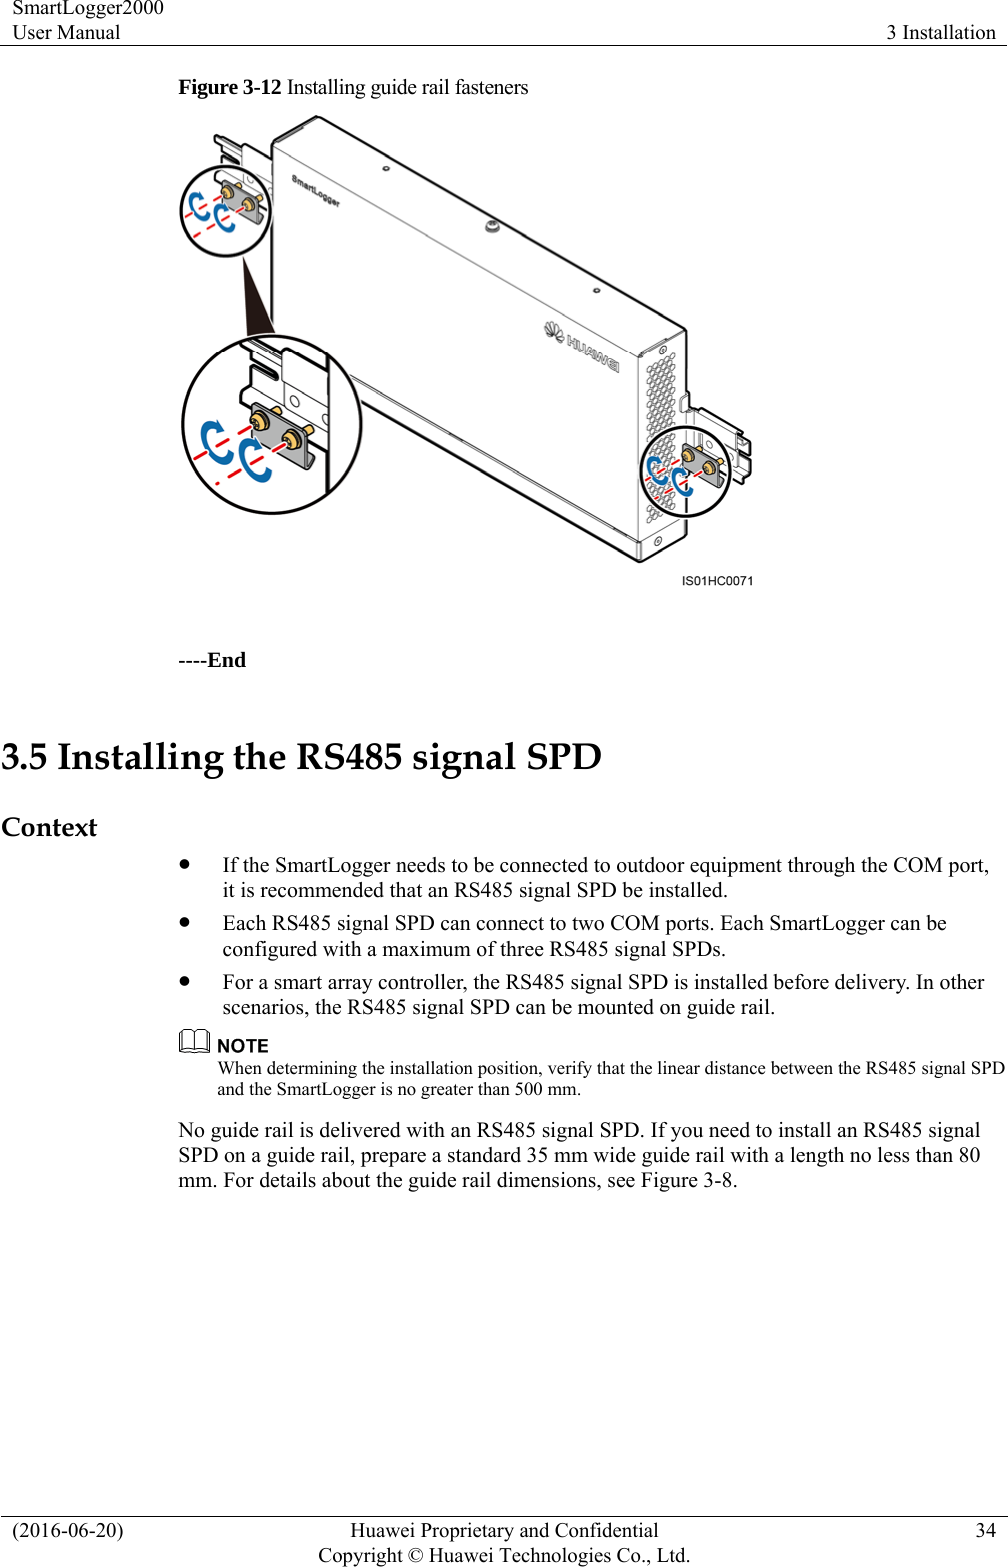 SmartLogger2000 User Manual  3 Installation (2016-06-20)  Huawei Proprietary and Confidential         Copyright © Huawei Technologies Co., Ltd.34 Figure 3-12 Installing guide rail fasteners   ----End 3.5 Installing the RS485 signal SPD Context  If the SmartLogger needs to be connected to outdoor equipment through the COM port, it is recommended that an RS485 signal SPD be installed.    Each RS485 signal SPD can connect to two COM ports. Each SmartLogger can be configured with a maximum of three RS485 signal SPDs.  For a smart array controller, the RS485 signal SPD is installed before delivery. In other scenarios, the RS485 signal SPD can be mounted on guide rail.  When determining the installation position, verify that the linear distance between the RS485 signal SPD and the SmartLogger is no greater than 500 mm.   No guide rail is delivered with an RS485 signal SPD. If you need to install an RS485 signal SPD on a guide rail, prepare a standard 35 mm wide guide rail with a length no less than 80 mm. For details about the guide rail dimensions, see Figure 3-8.   